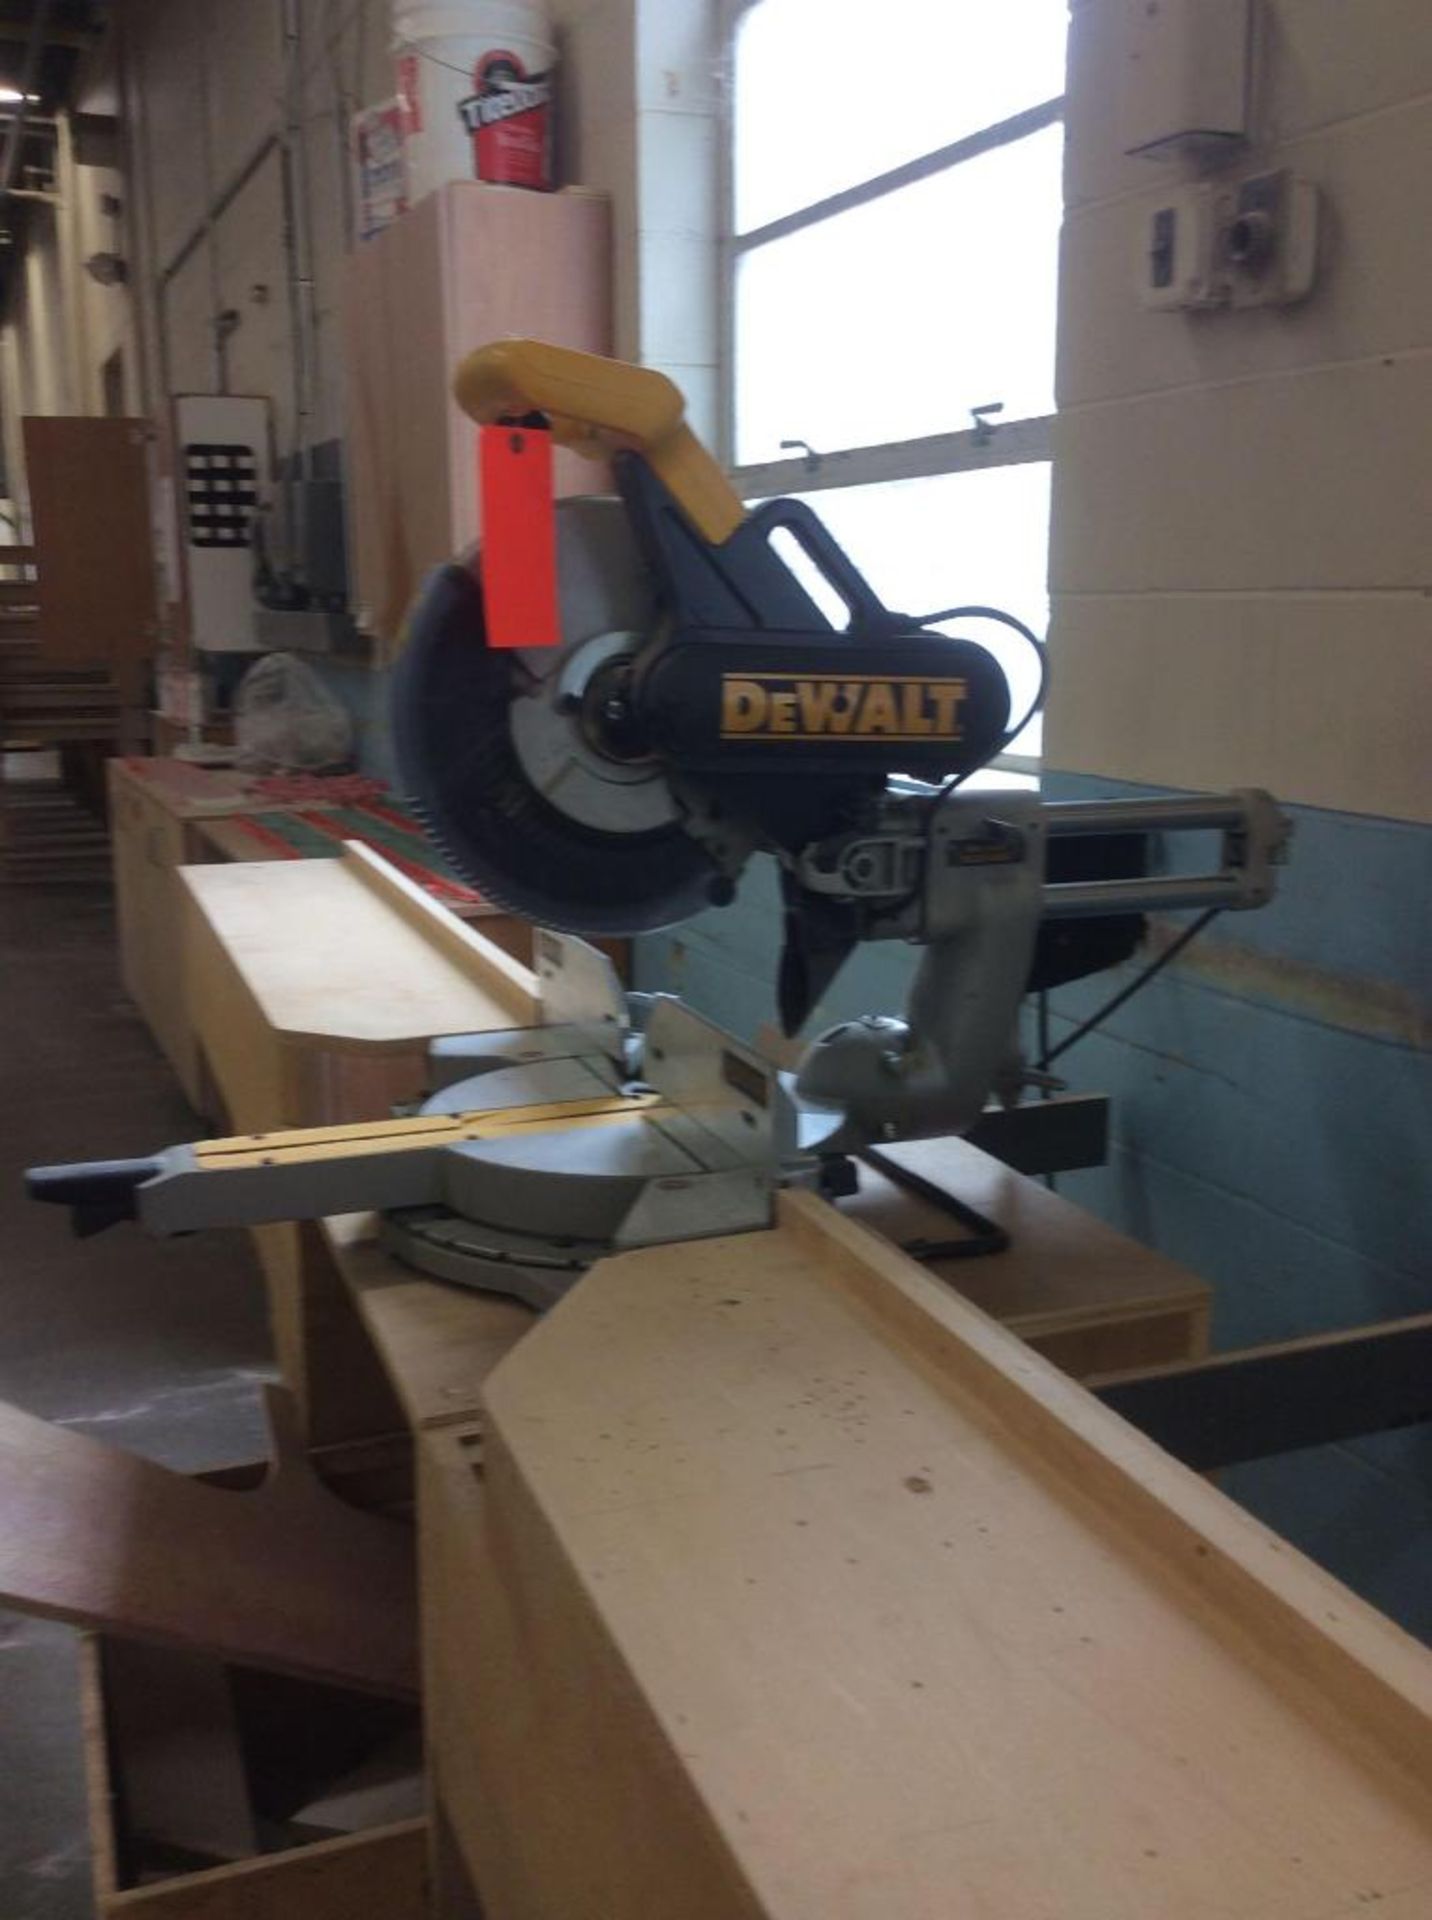 Dewalt 708 sliding arm, compound miter saw, with custom portable stand, must take stand. - Image 2 of 3